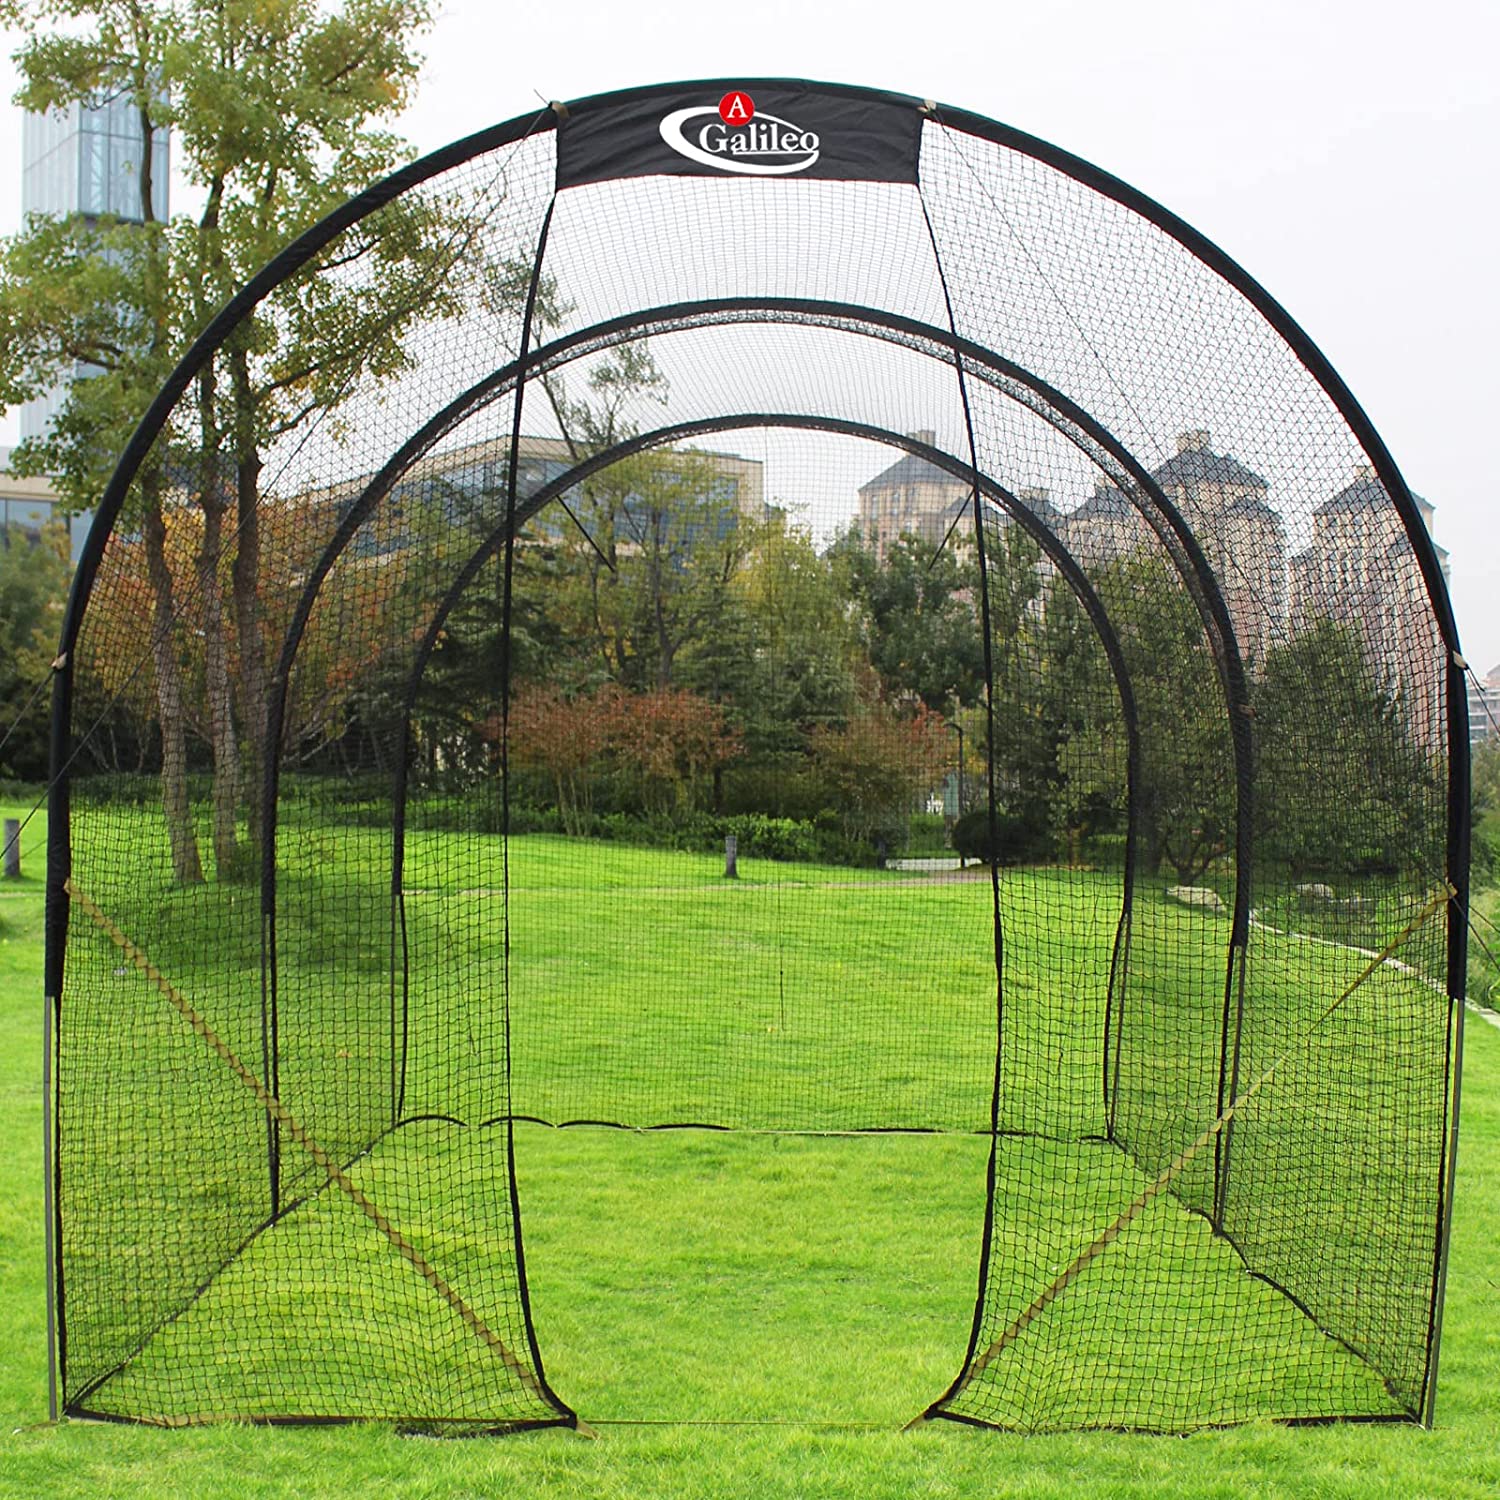 Gagalileo 16x10x10FT Baseball Batting Cage Net Replacement,Portable Pitching Batting Net,Outdoor Stable Baseball Net